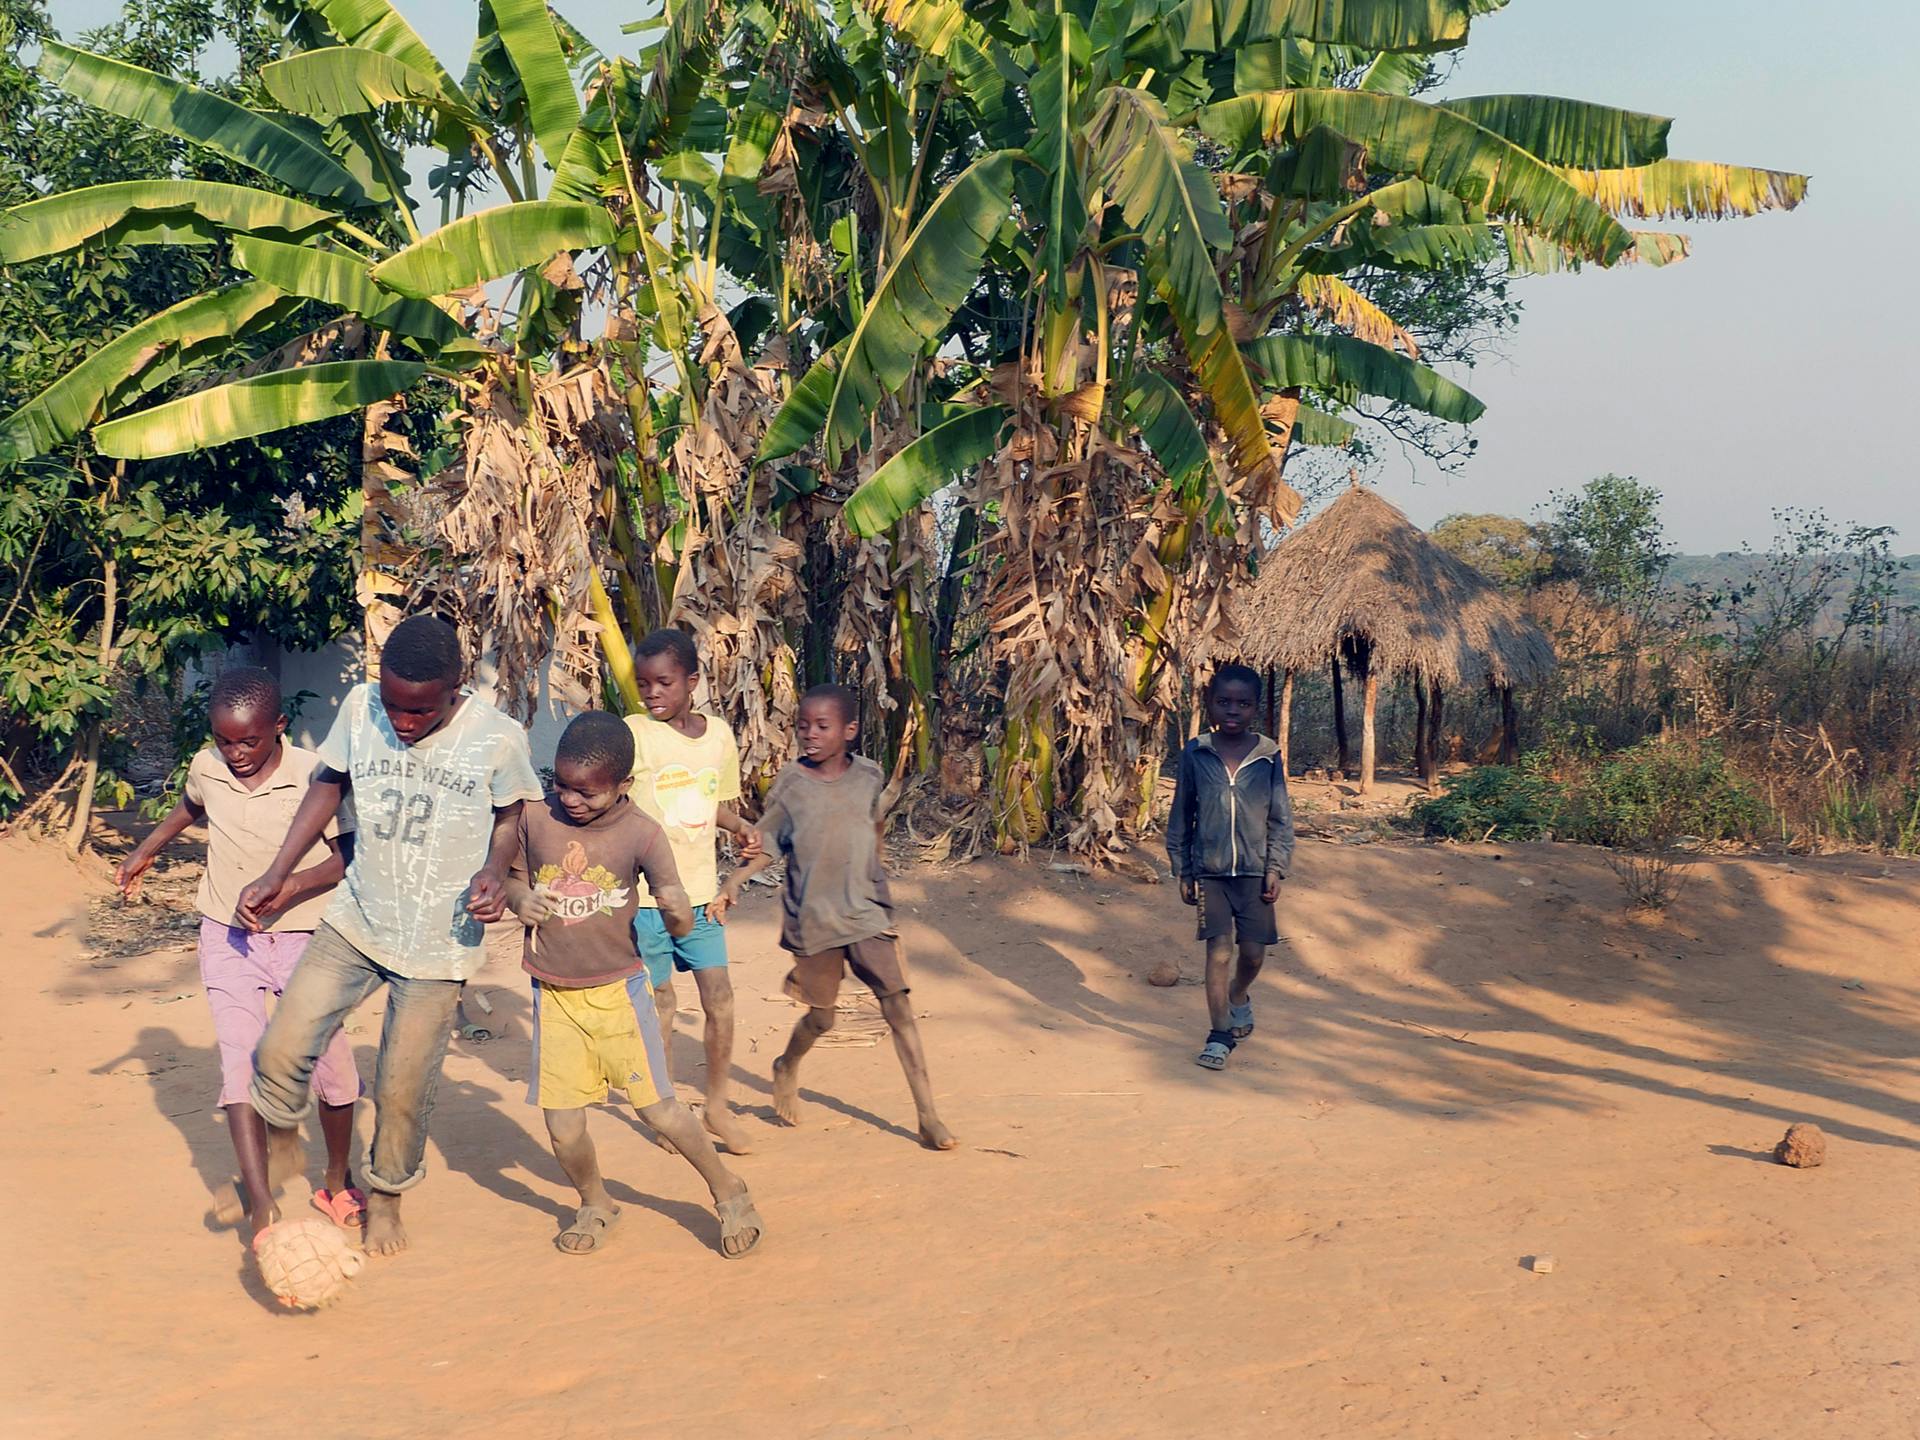 A group of kids playing football on dusty ground.